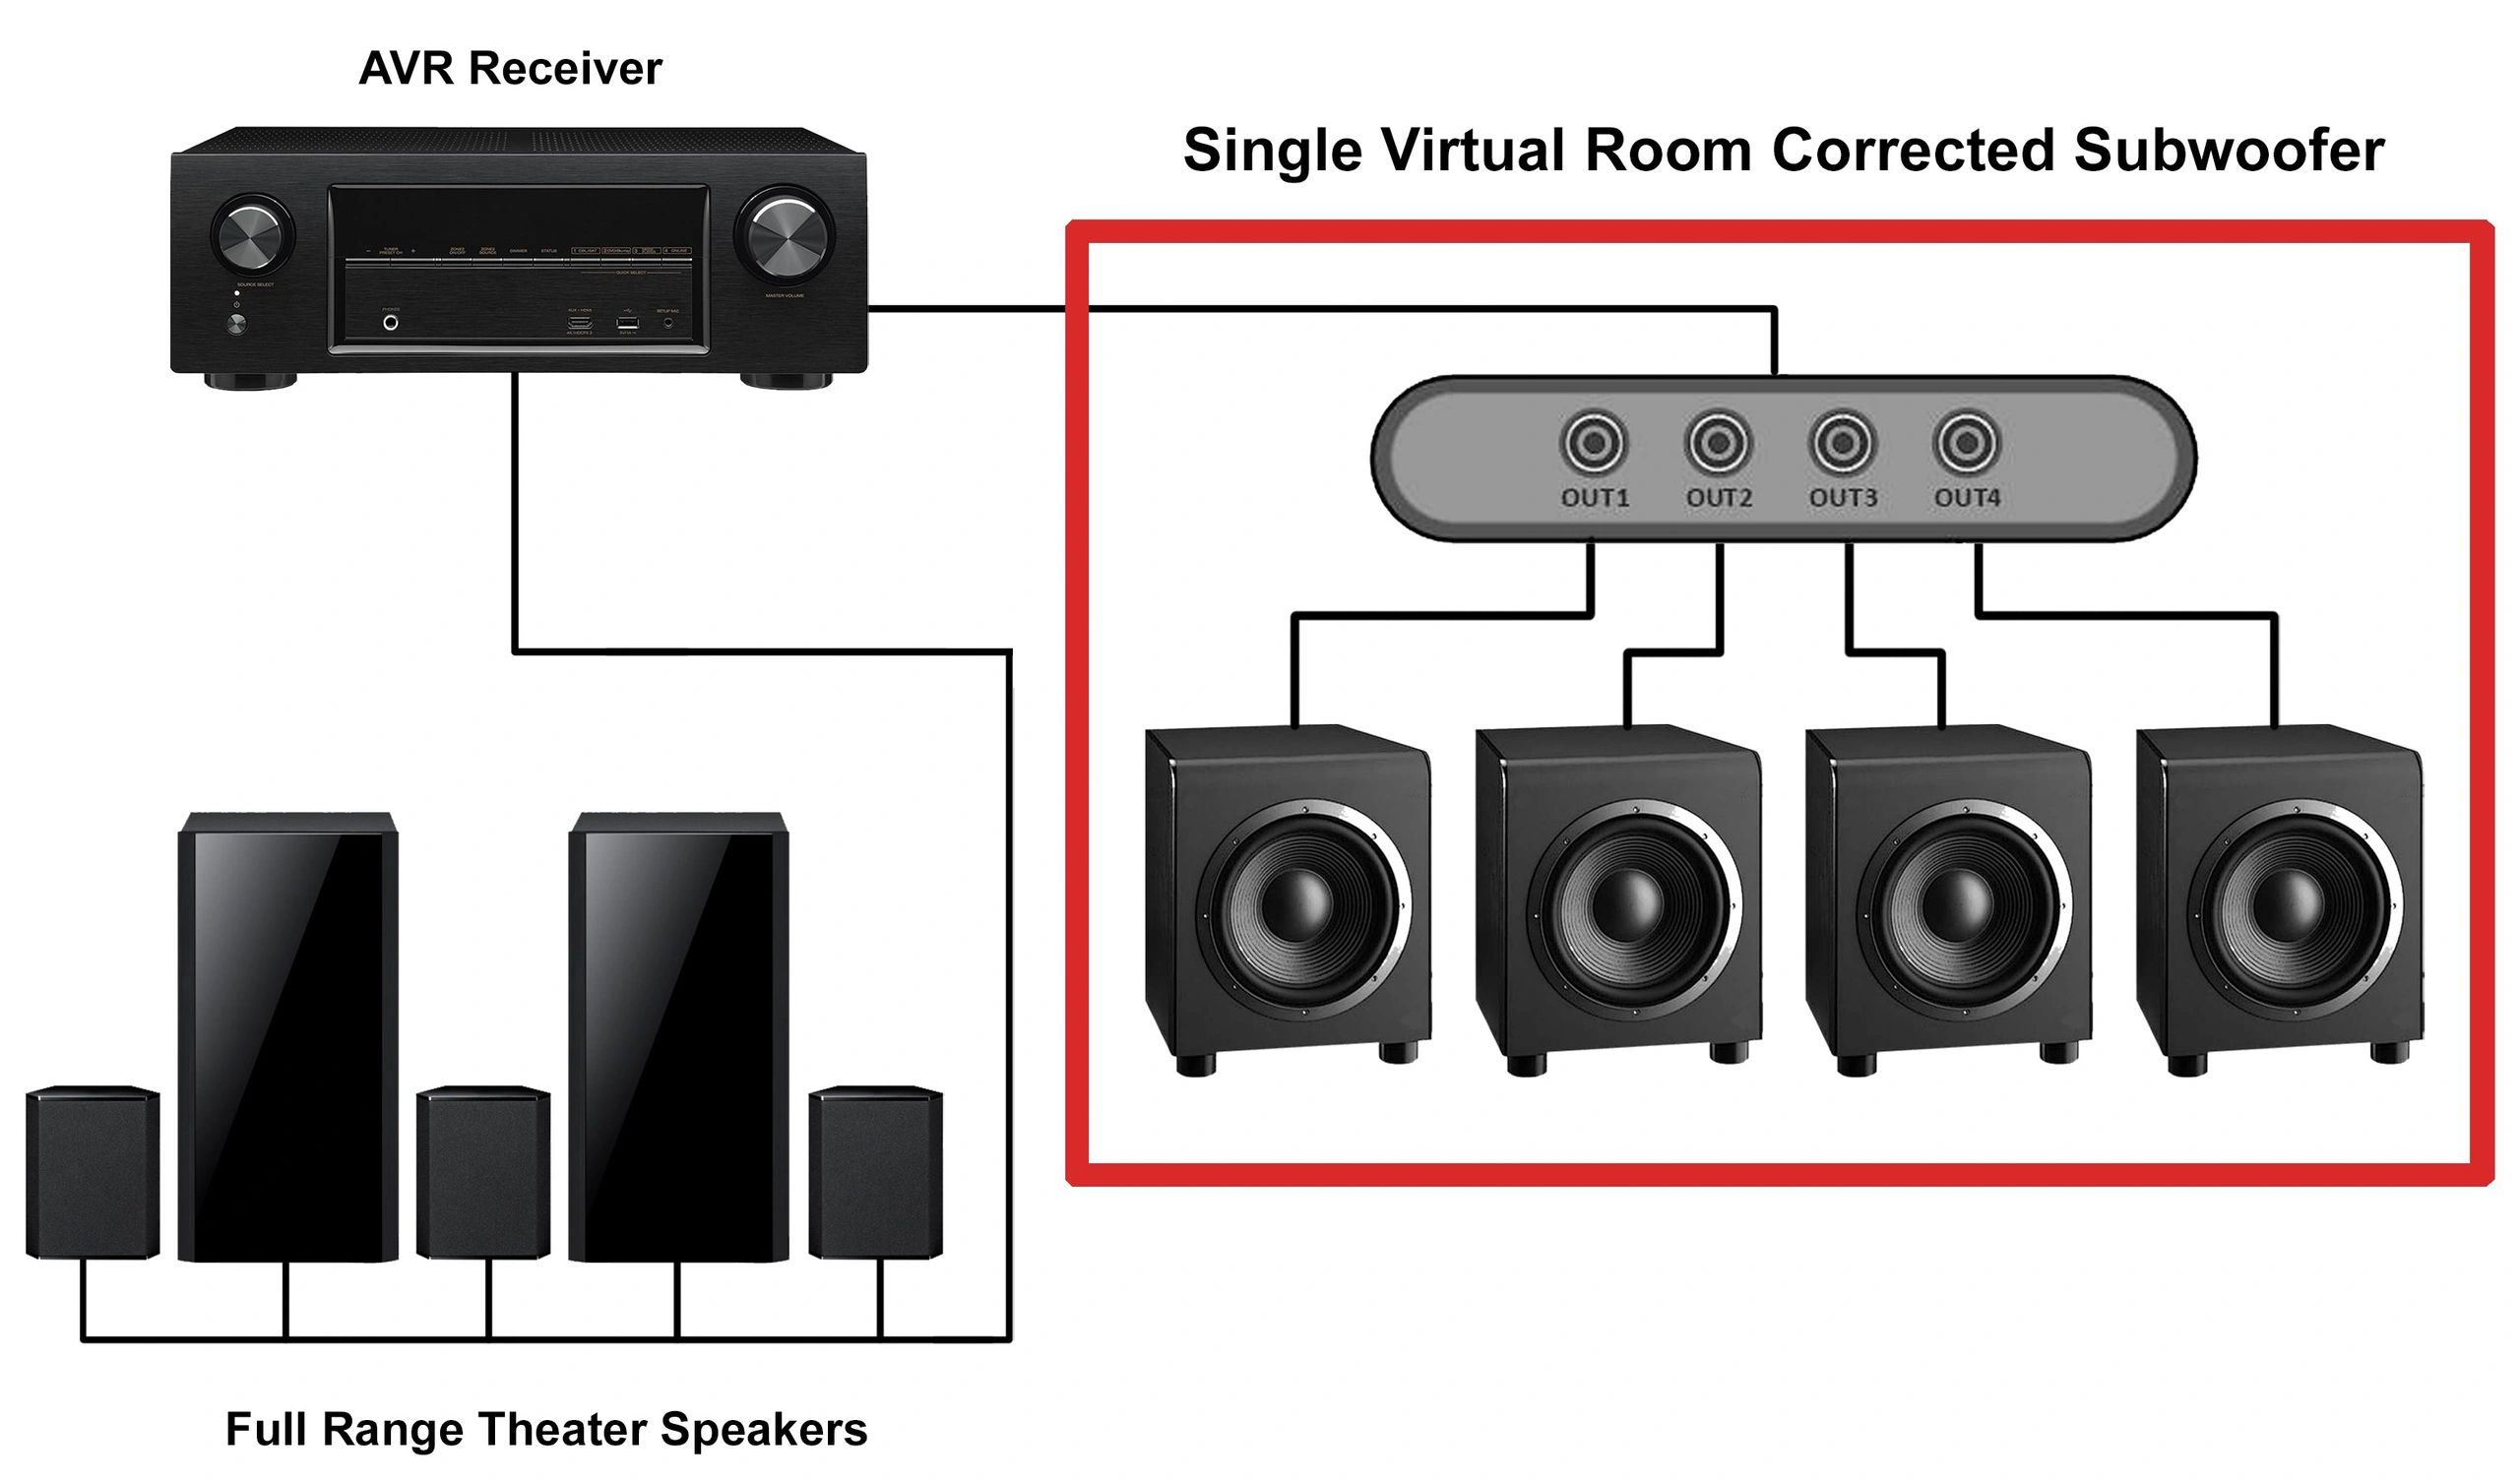 The Best Ways to Integrate Multiple Subwoofers